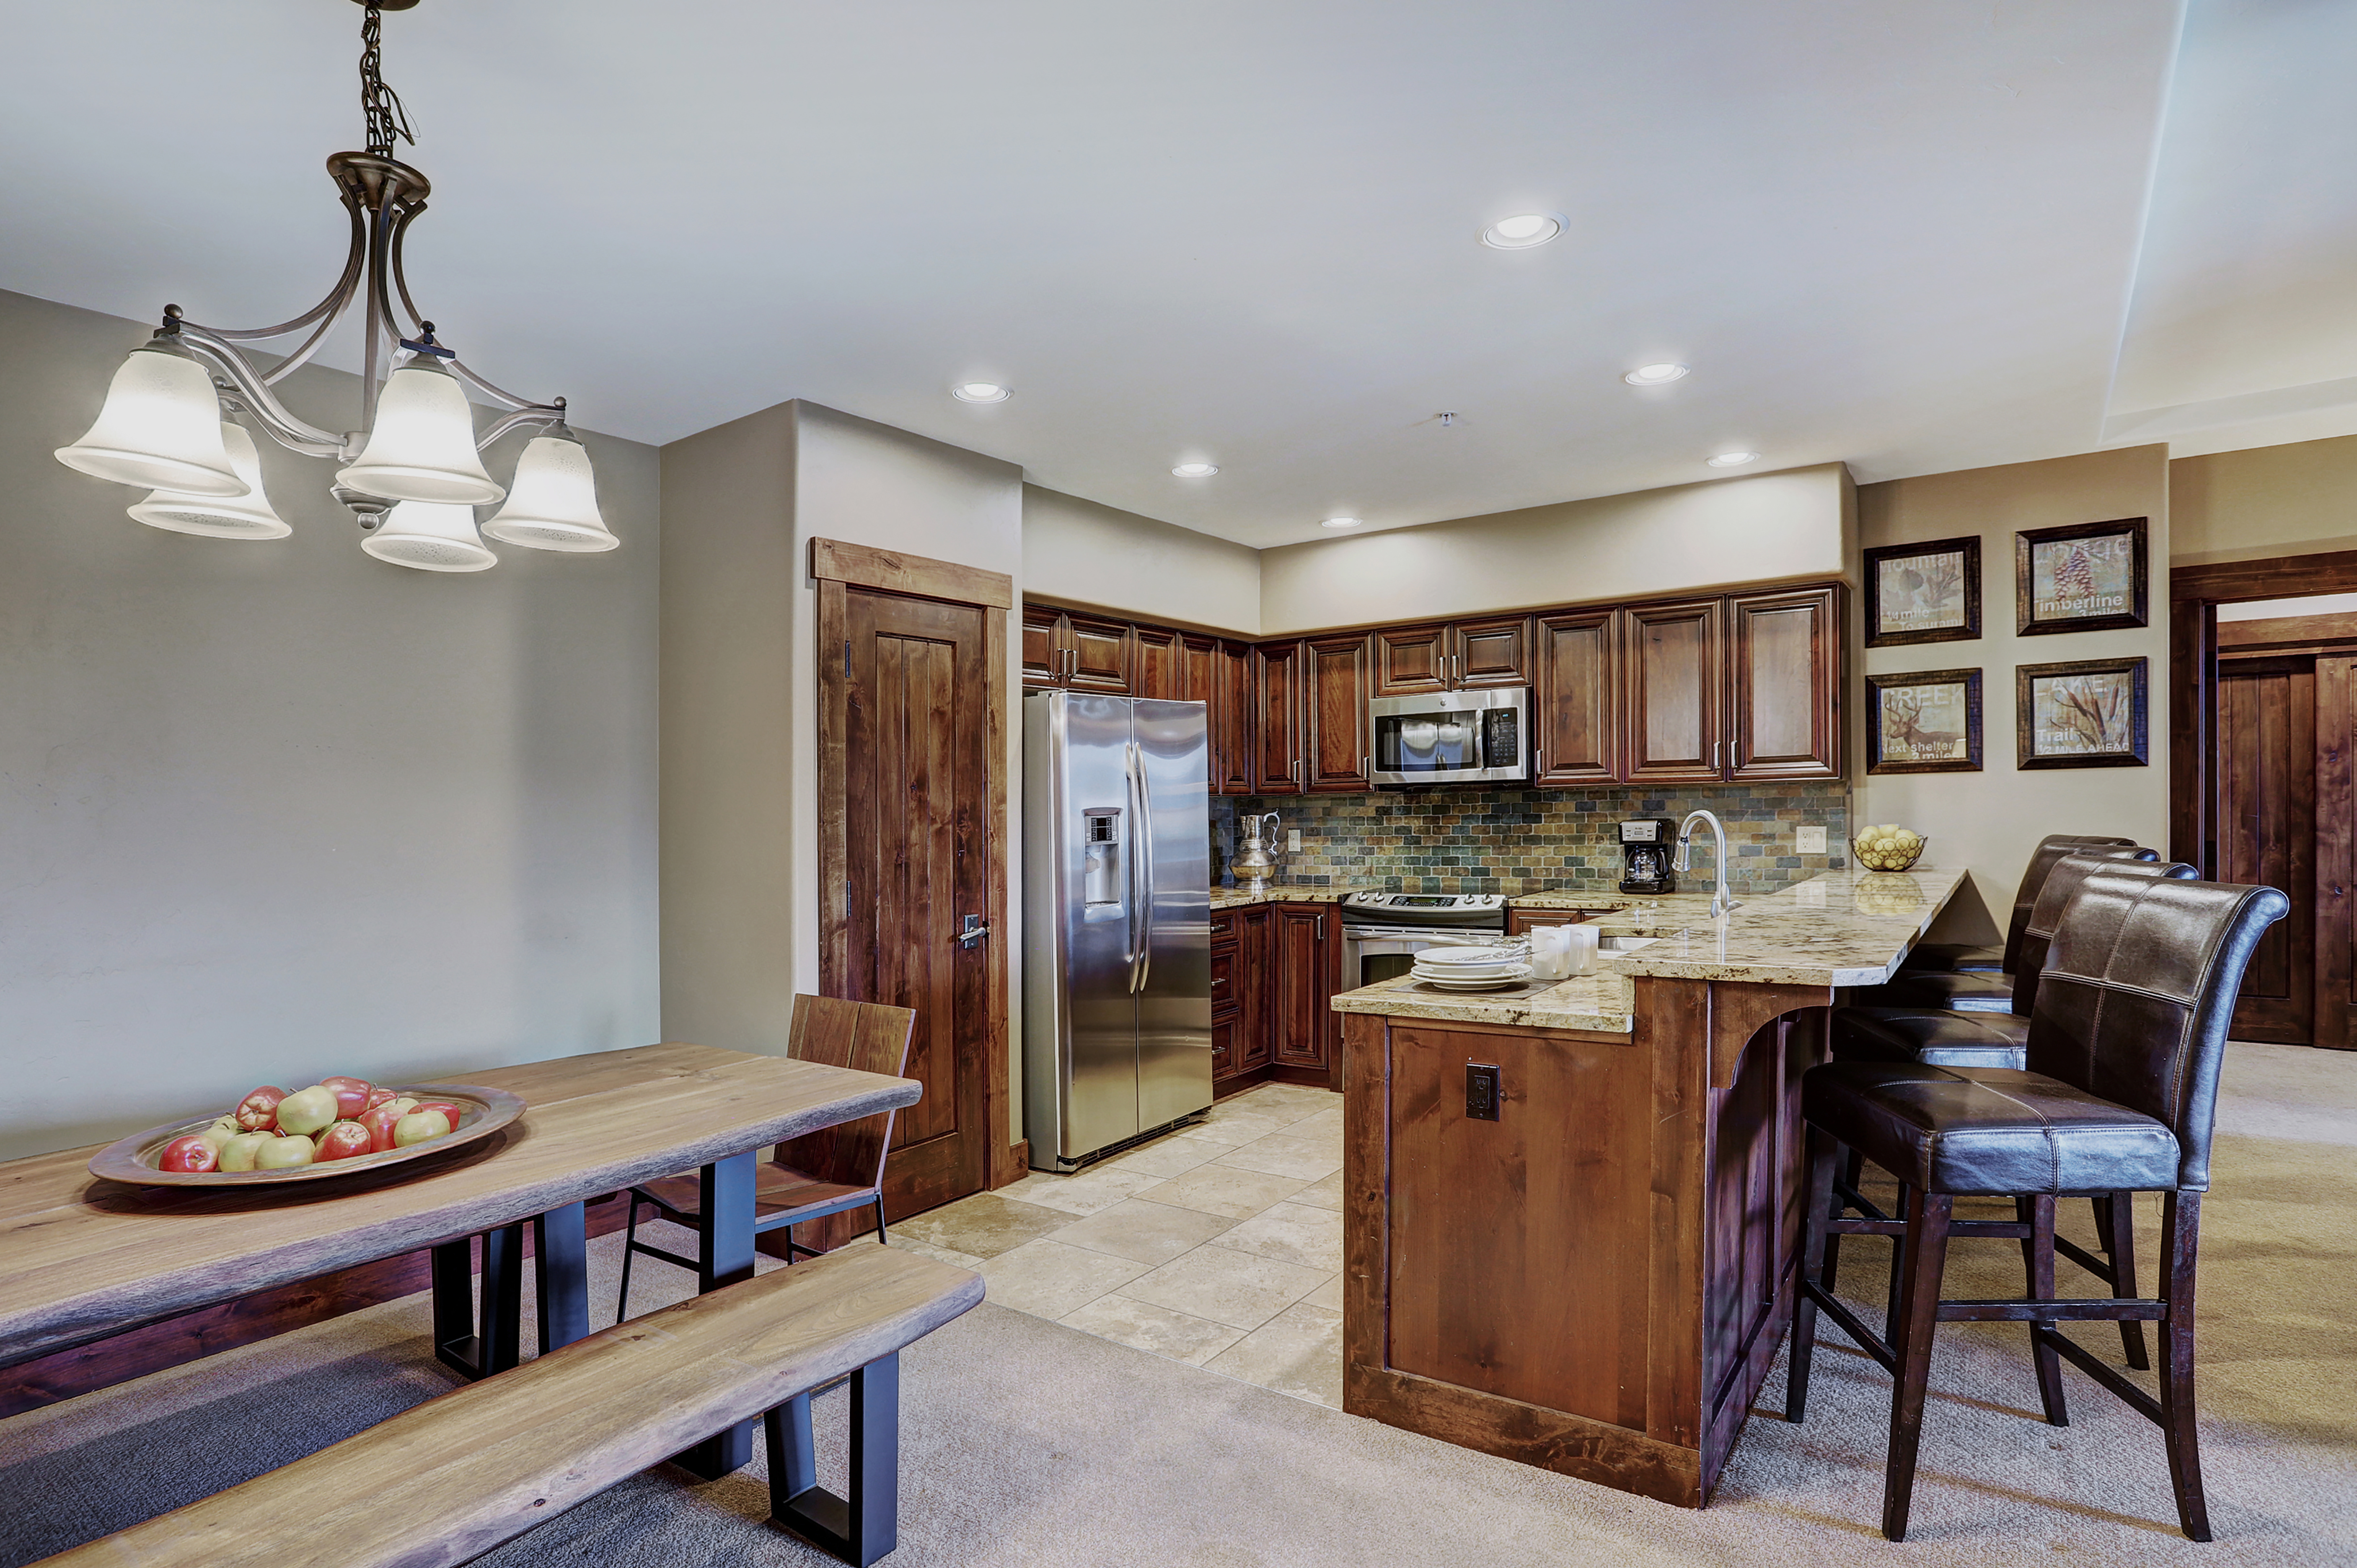 Spacious dining area for yummy meals or fun game nights.